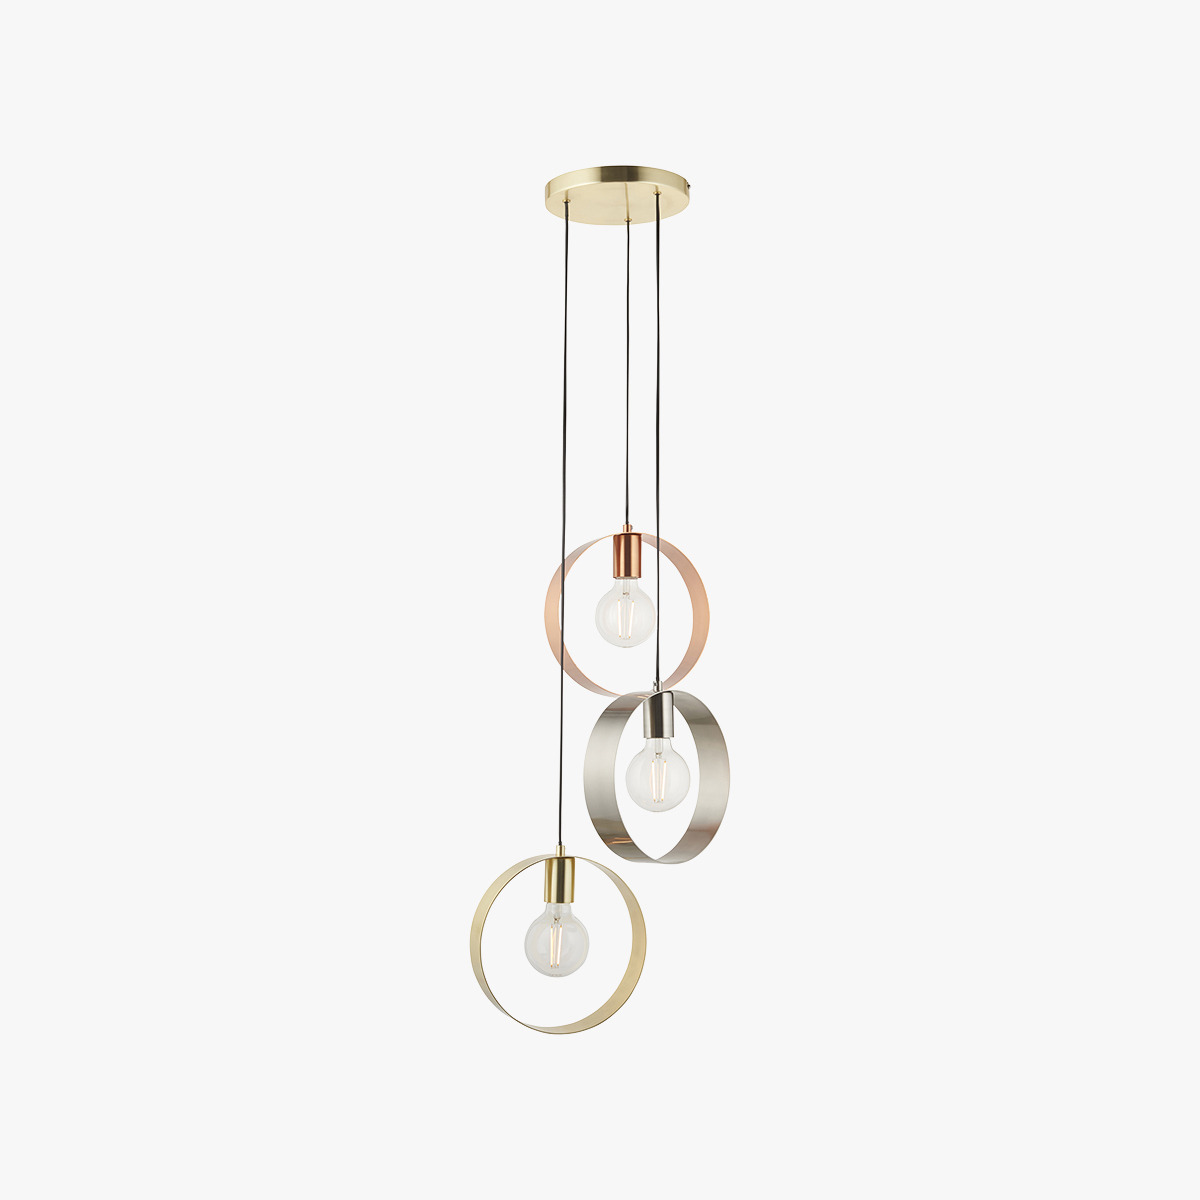 Magus 3 light Pendant in Brushed Brass & Brushed Nickel